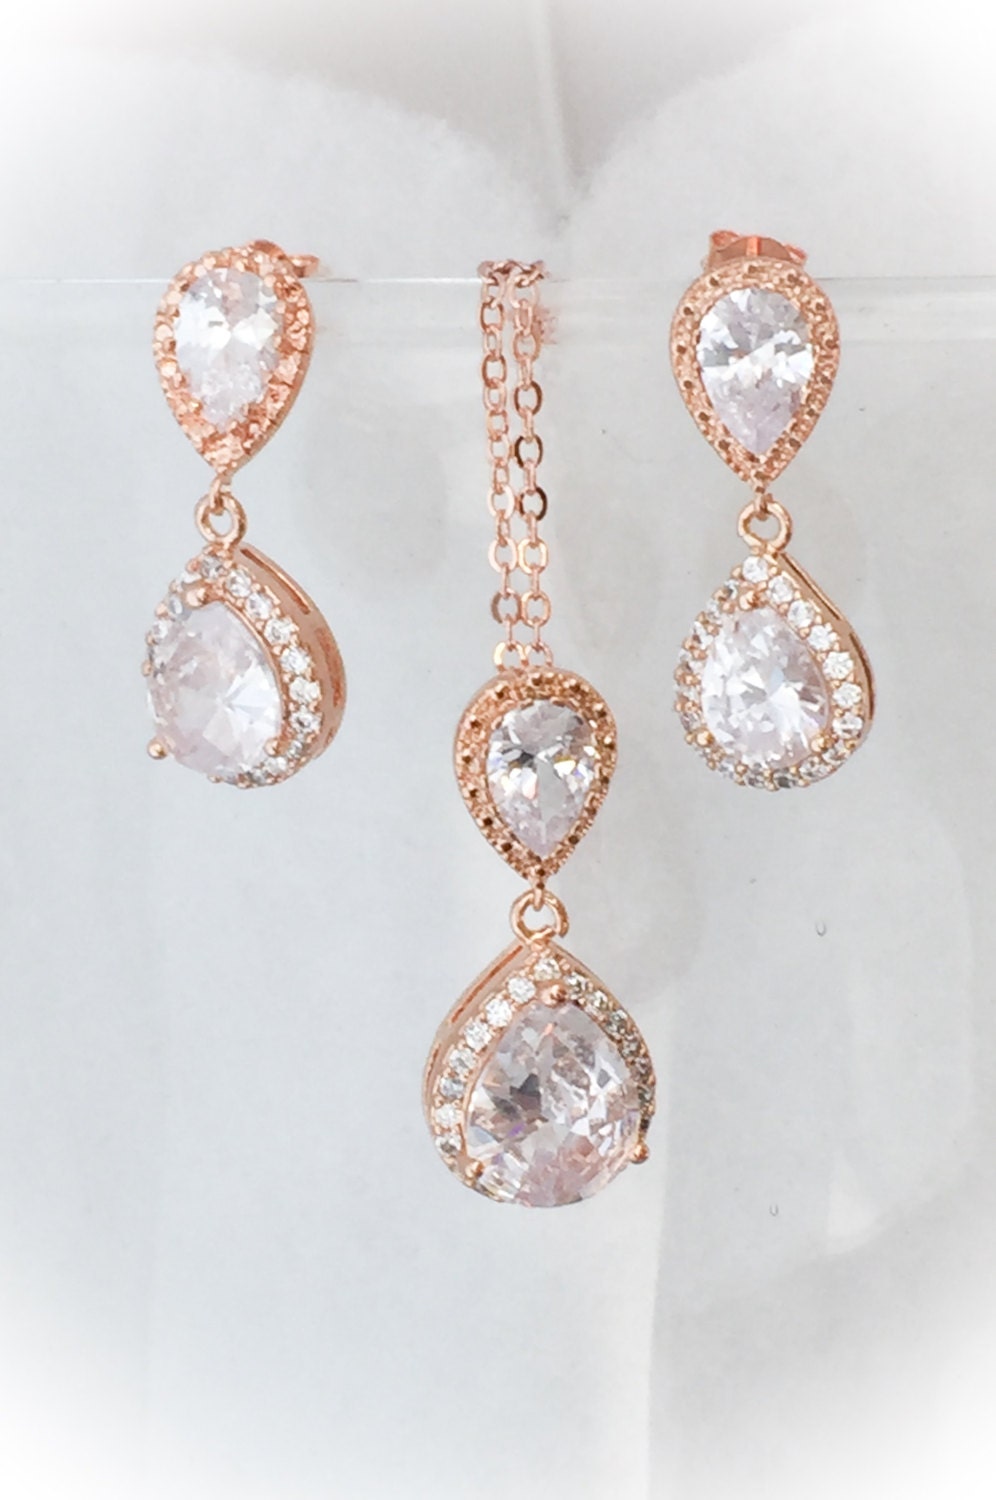 Rose gold, gold or silver bridal jewelry set- bridesmaids jewelry, wedding jewelry.  bridal necklace and earrings set